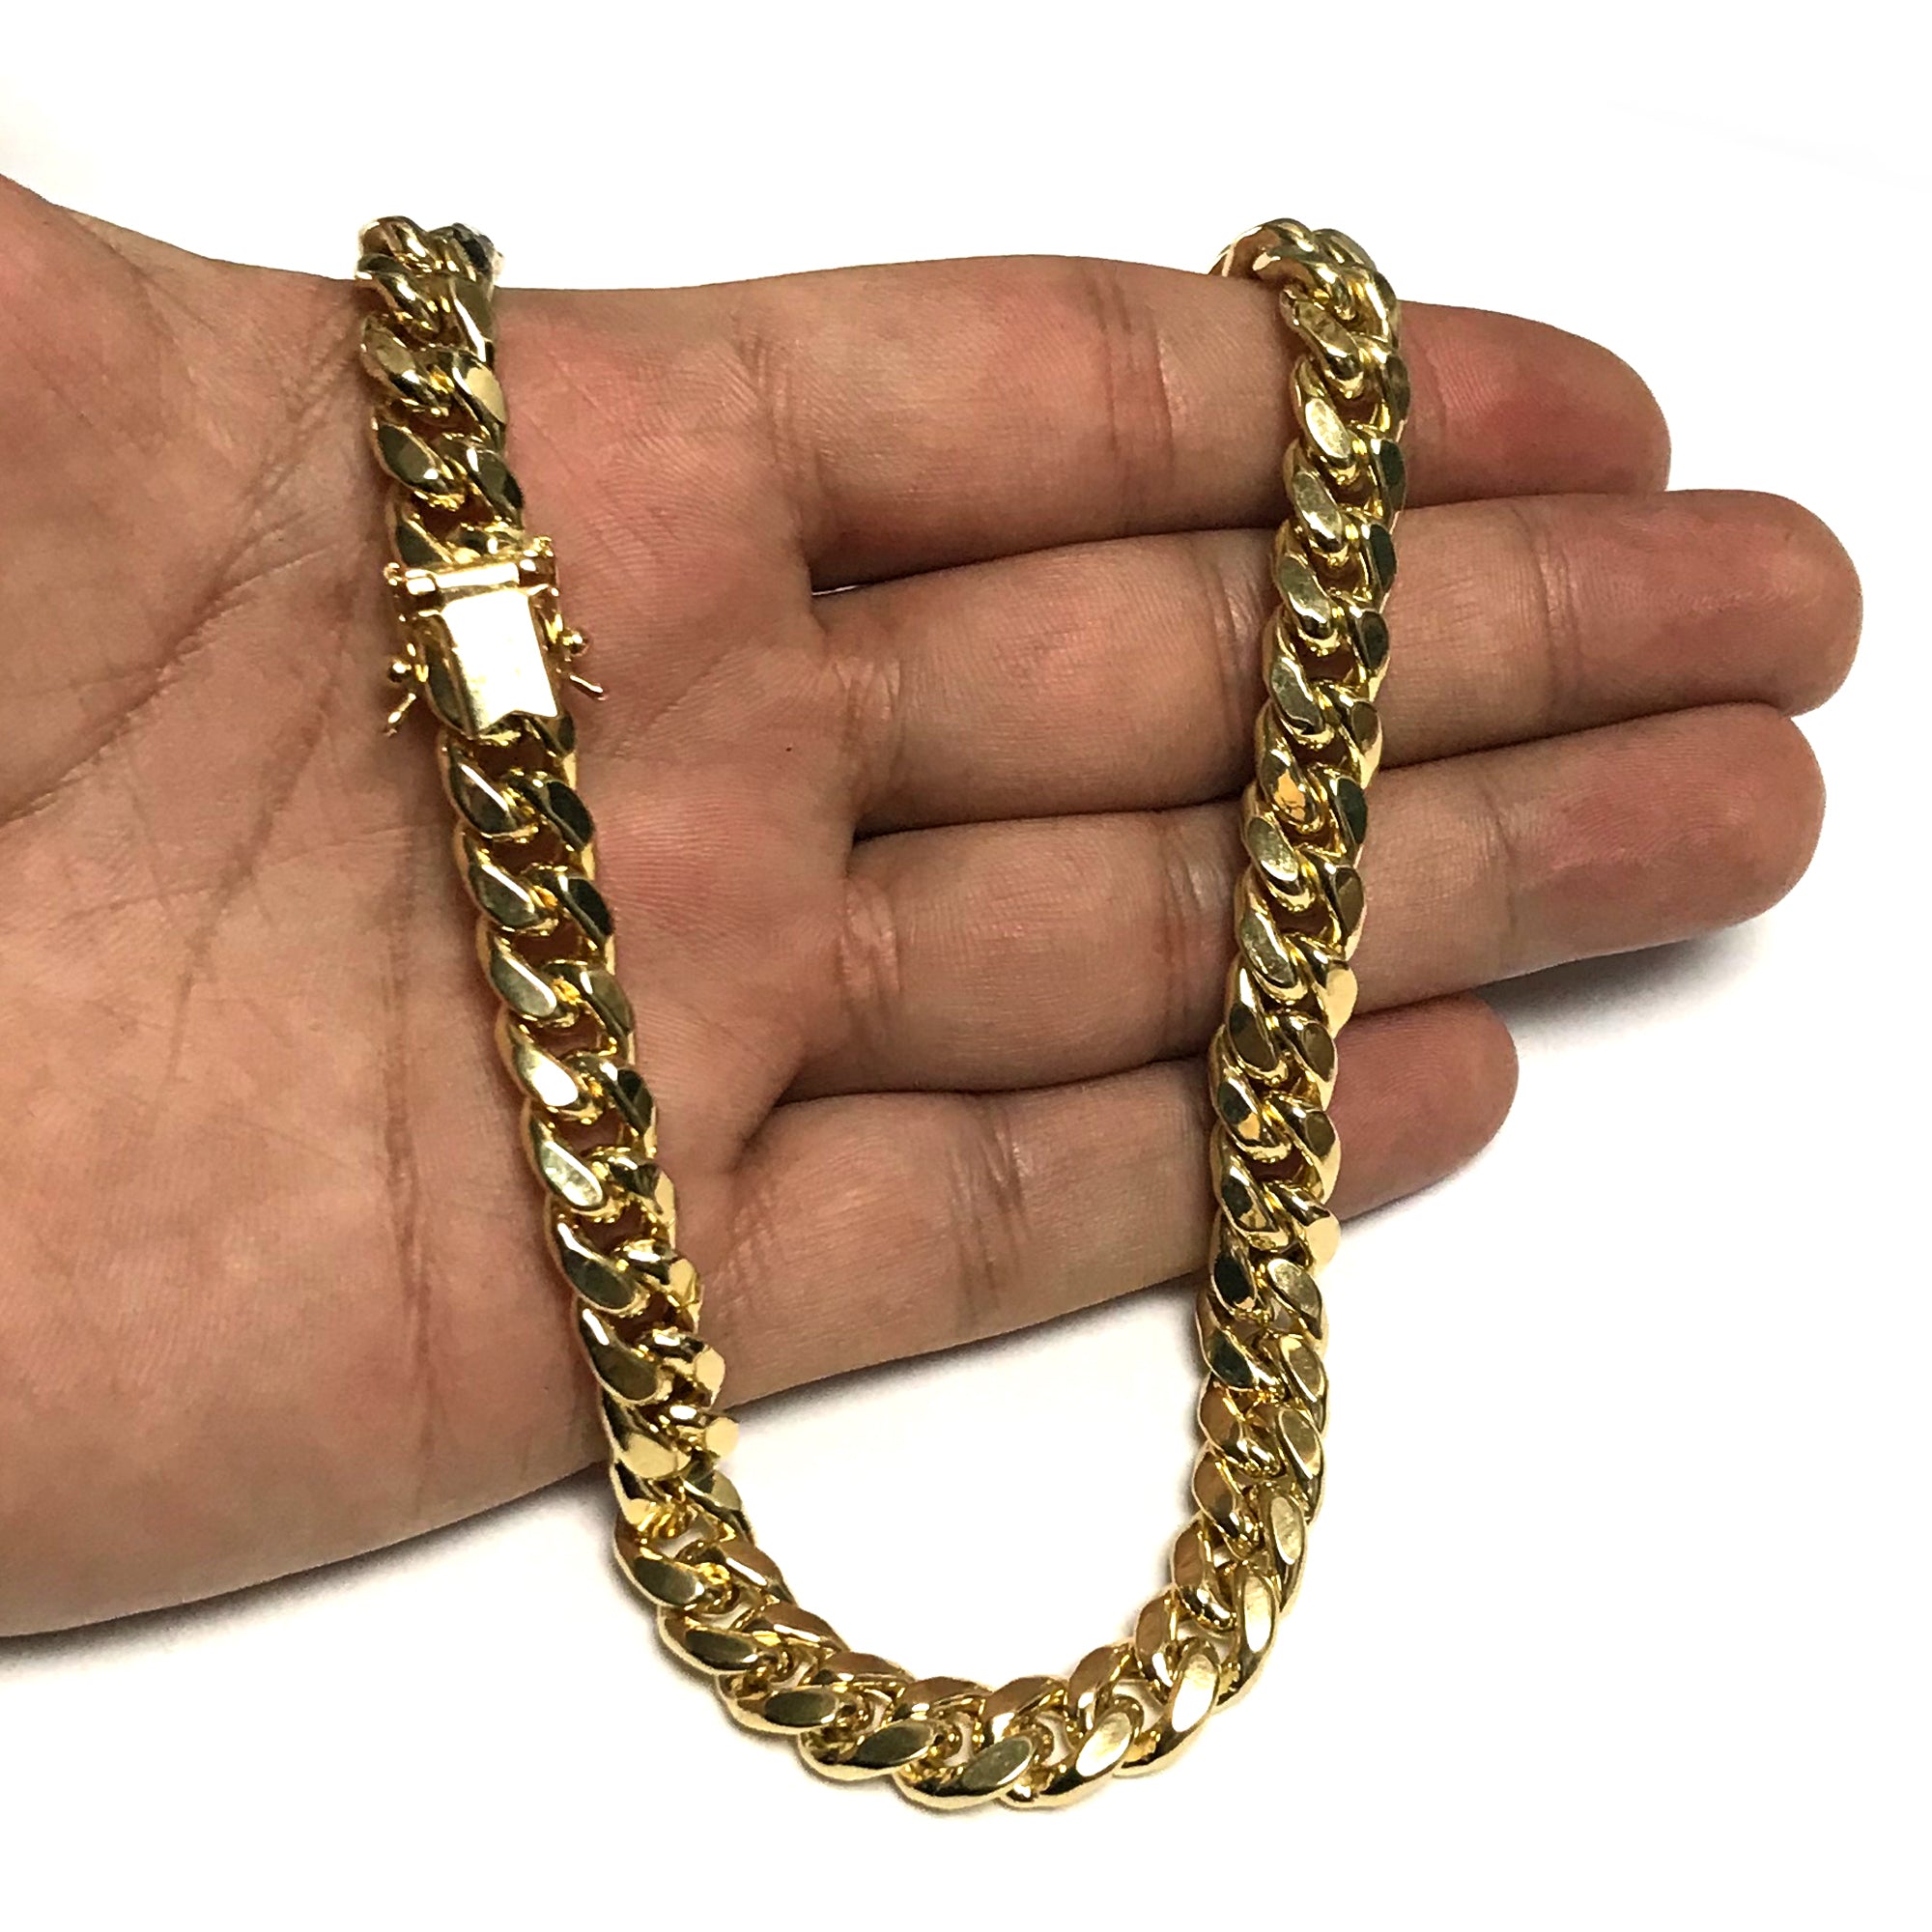 14k Yellow Semi Solid Gold Miami Cuban Link Chain Necklace, Width 9mm